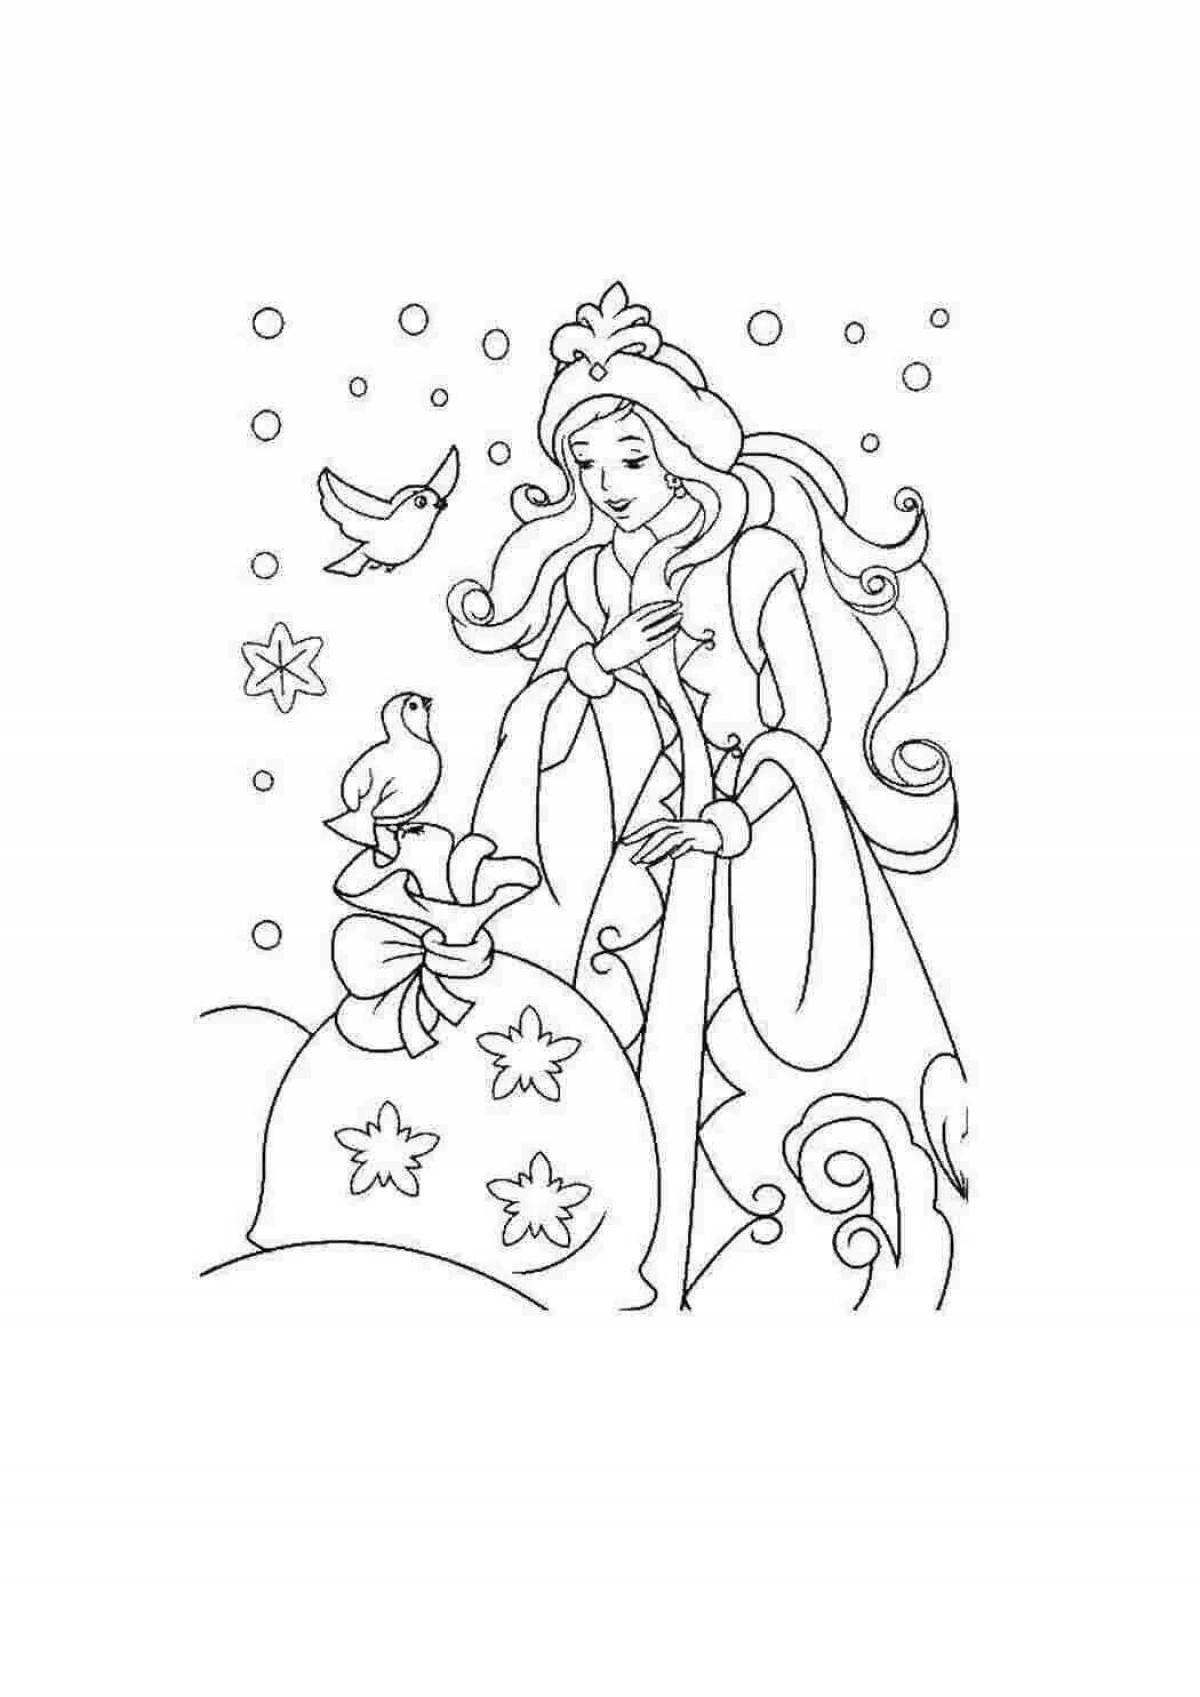 Coloring page sparkling lady snowstorm